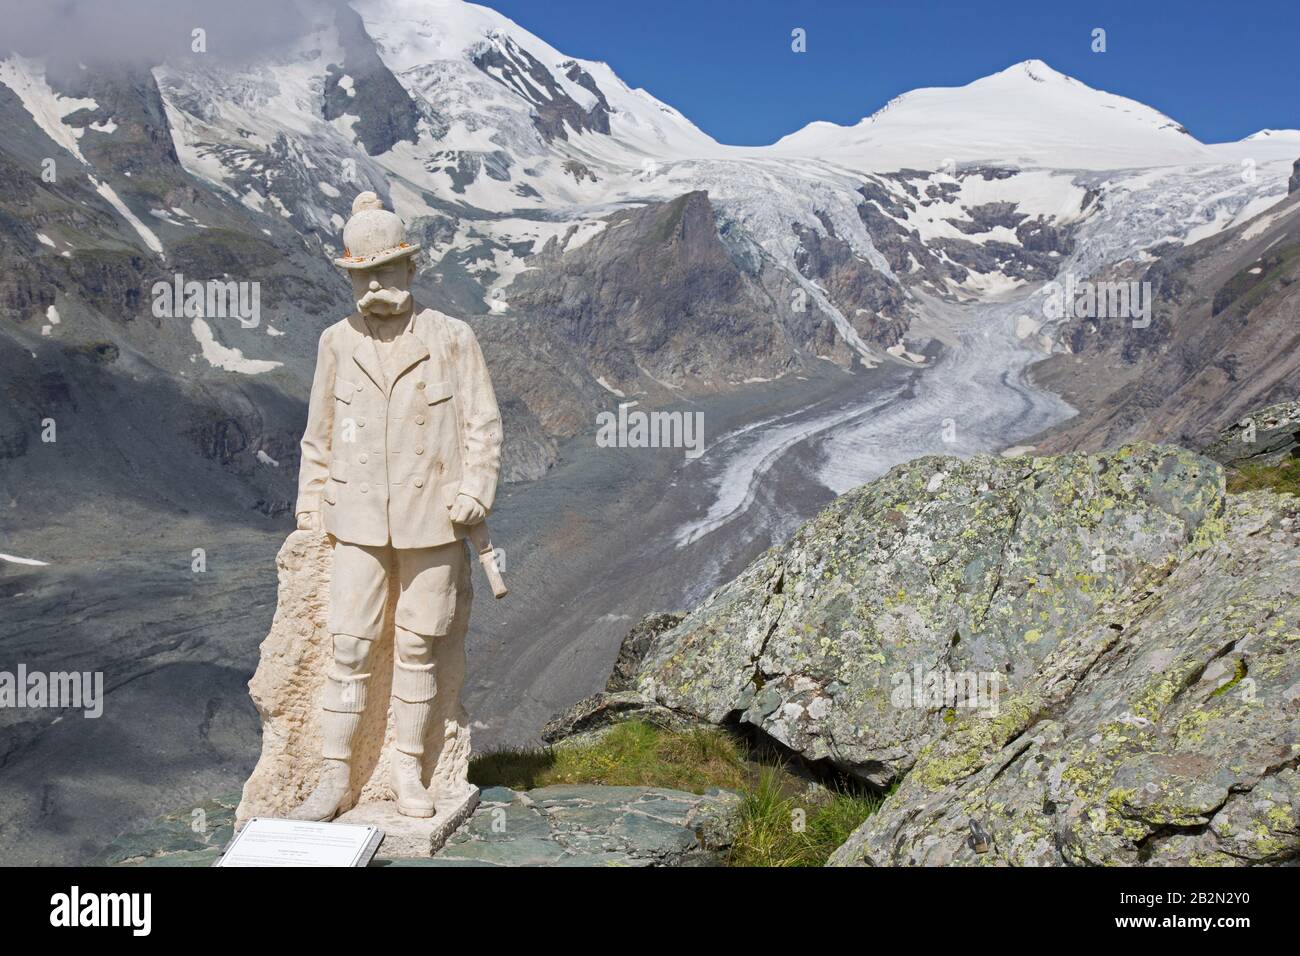 Kaiser Franz Josef sculpture and the shrinking Pasterze, longest glacier in Austria and Eastern Alps in 2018, Hohe Tauern NP, Carinthia, Austria Stock Photo